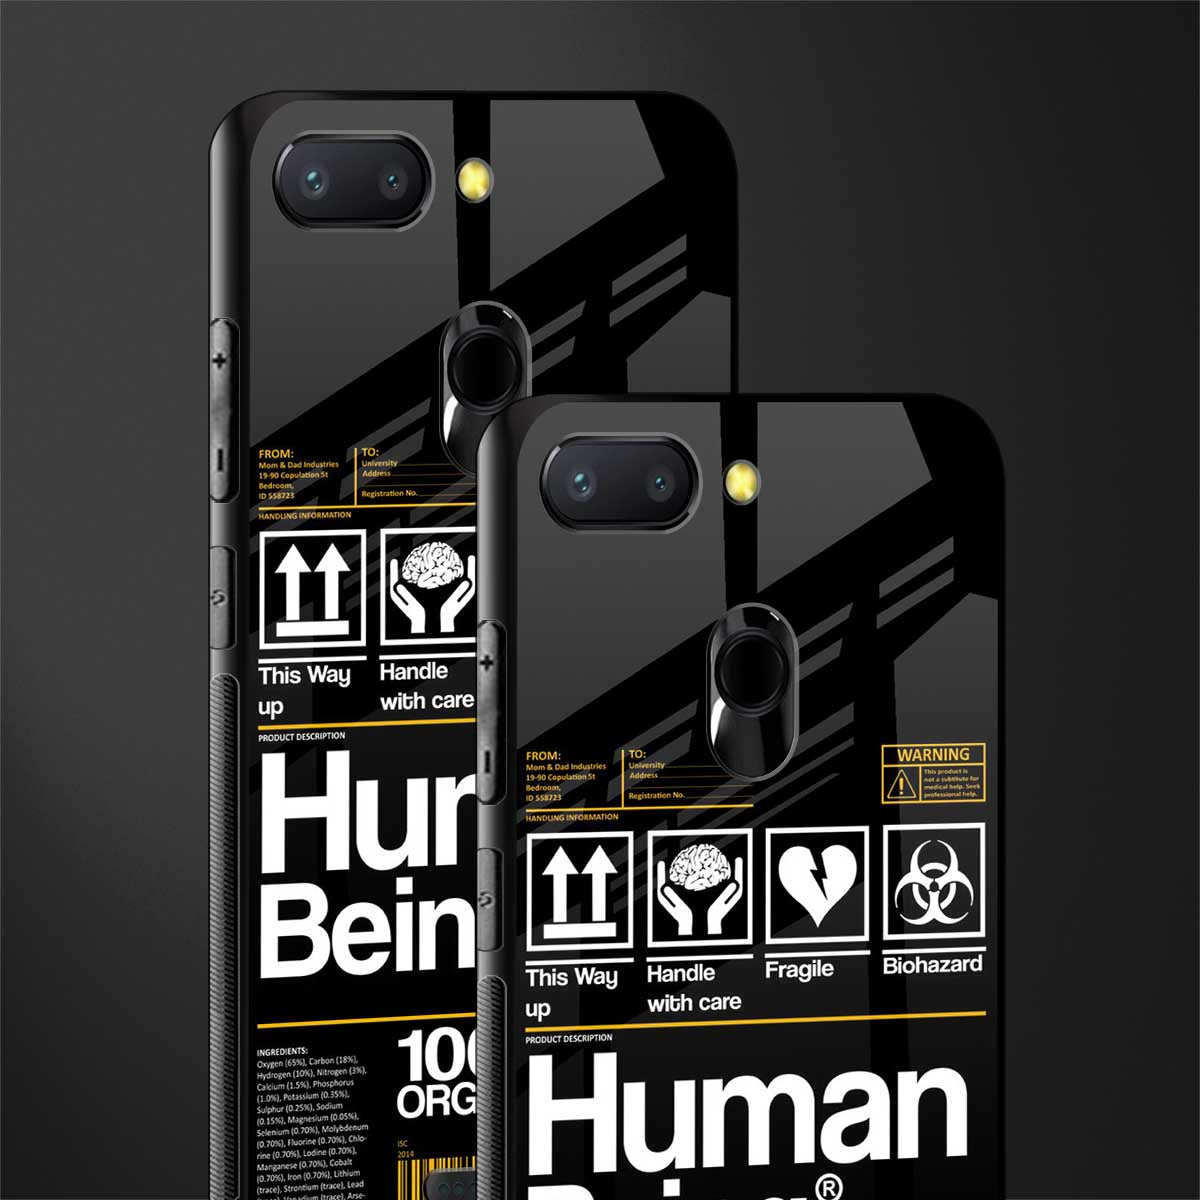 human being label phone cover for redmi 6